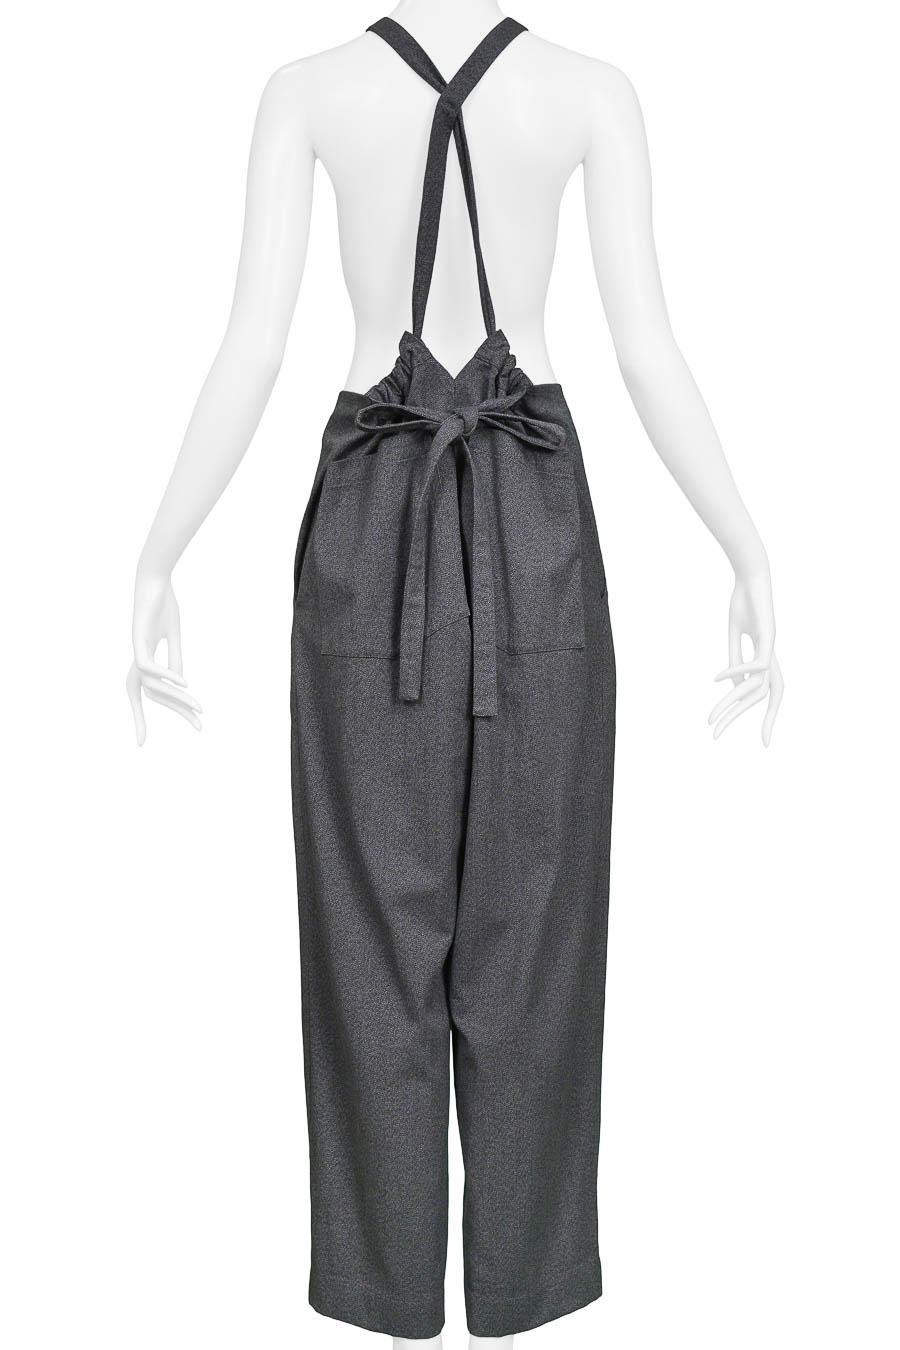 Women's Yohji Yamamoto Grey Paper Bag Jumpsuit With Adjustable Straps For Sale